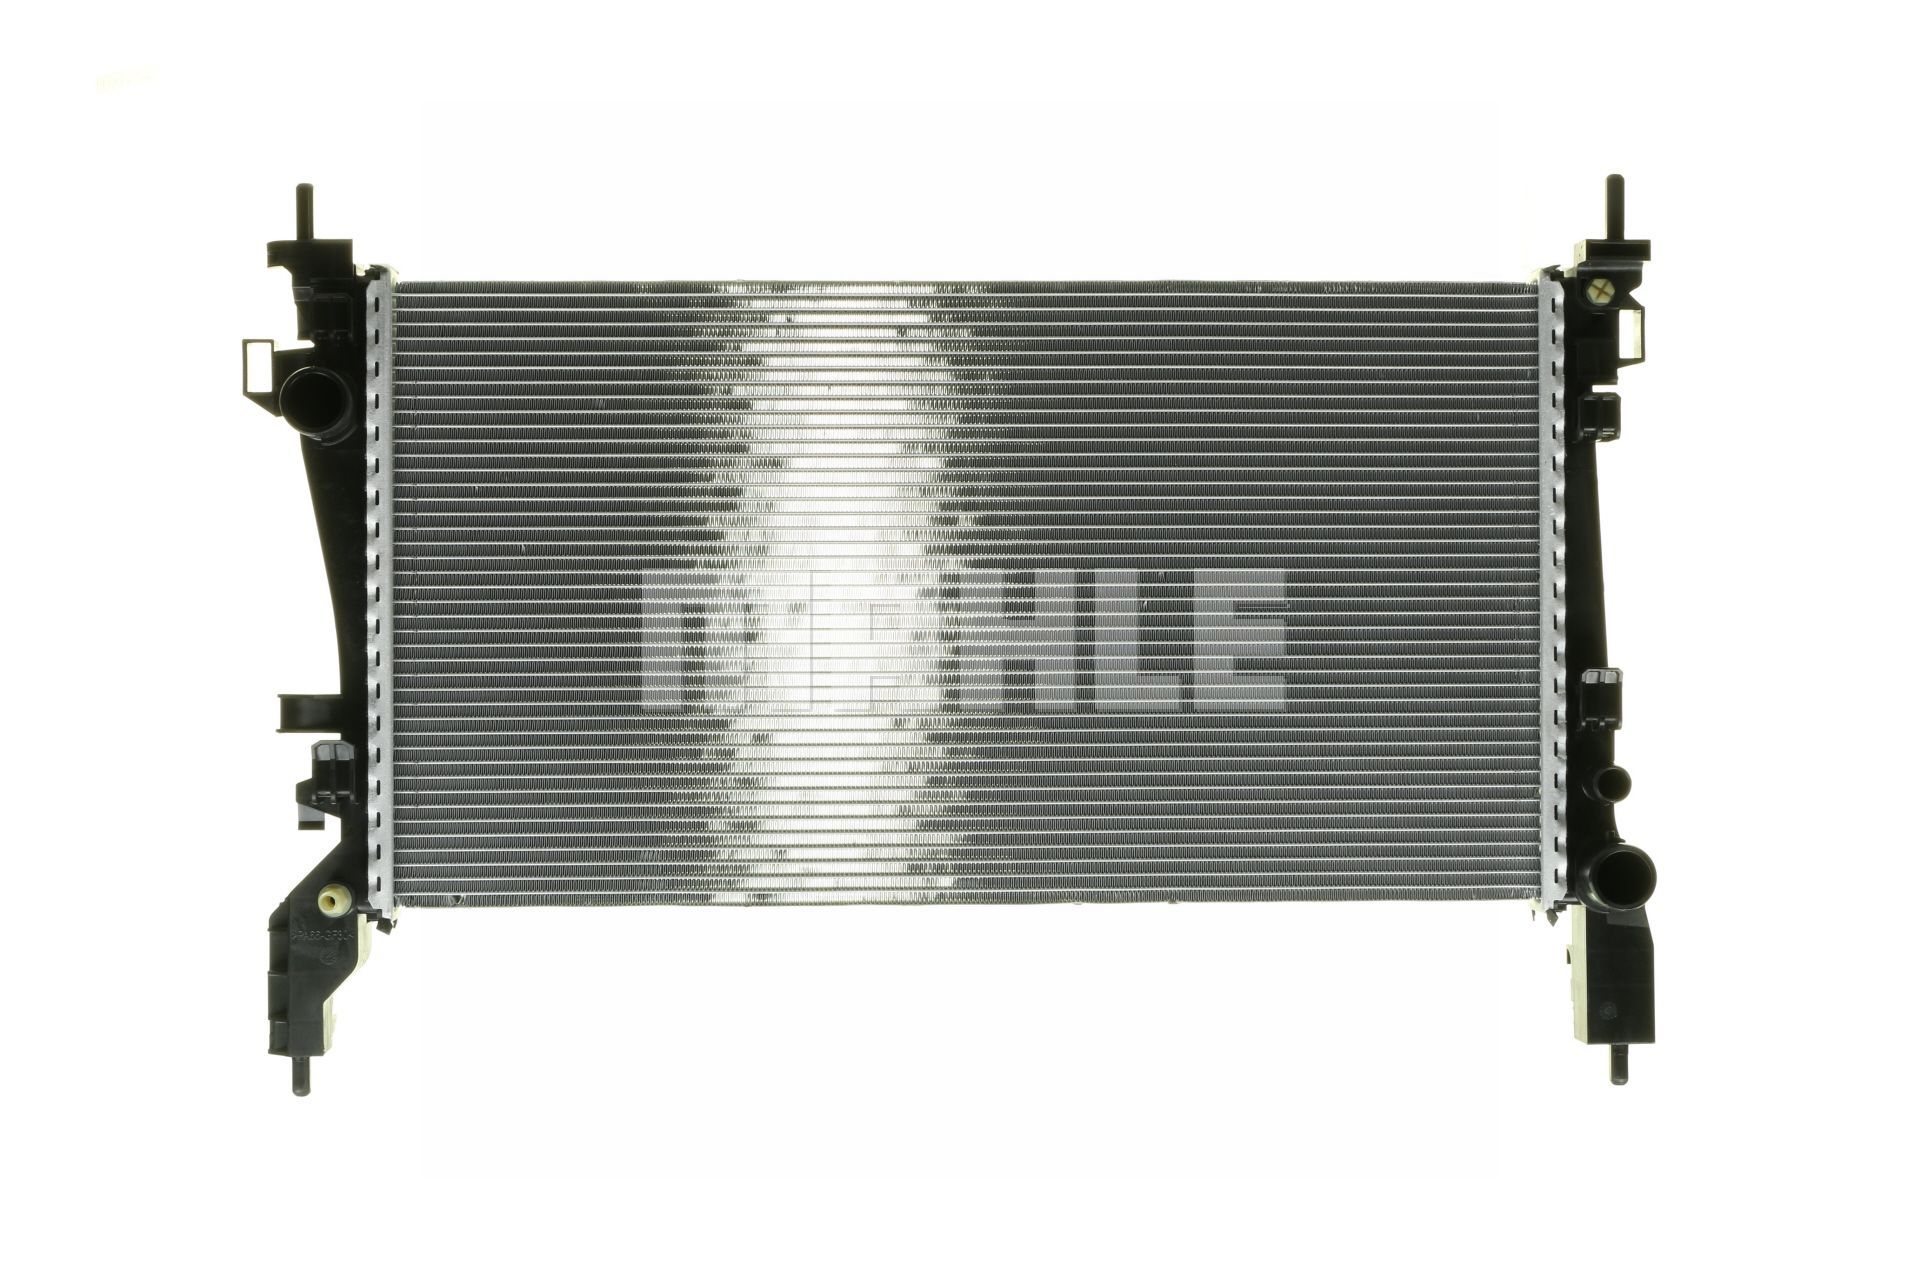 MAHLE ORIGINAL CR 1120 000P Engine radiator for vehicles with air conditioning, 630 x 342 x 26 mm, Manual Transmission, Brazed cooling fins